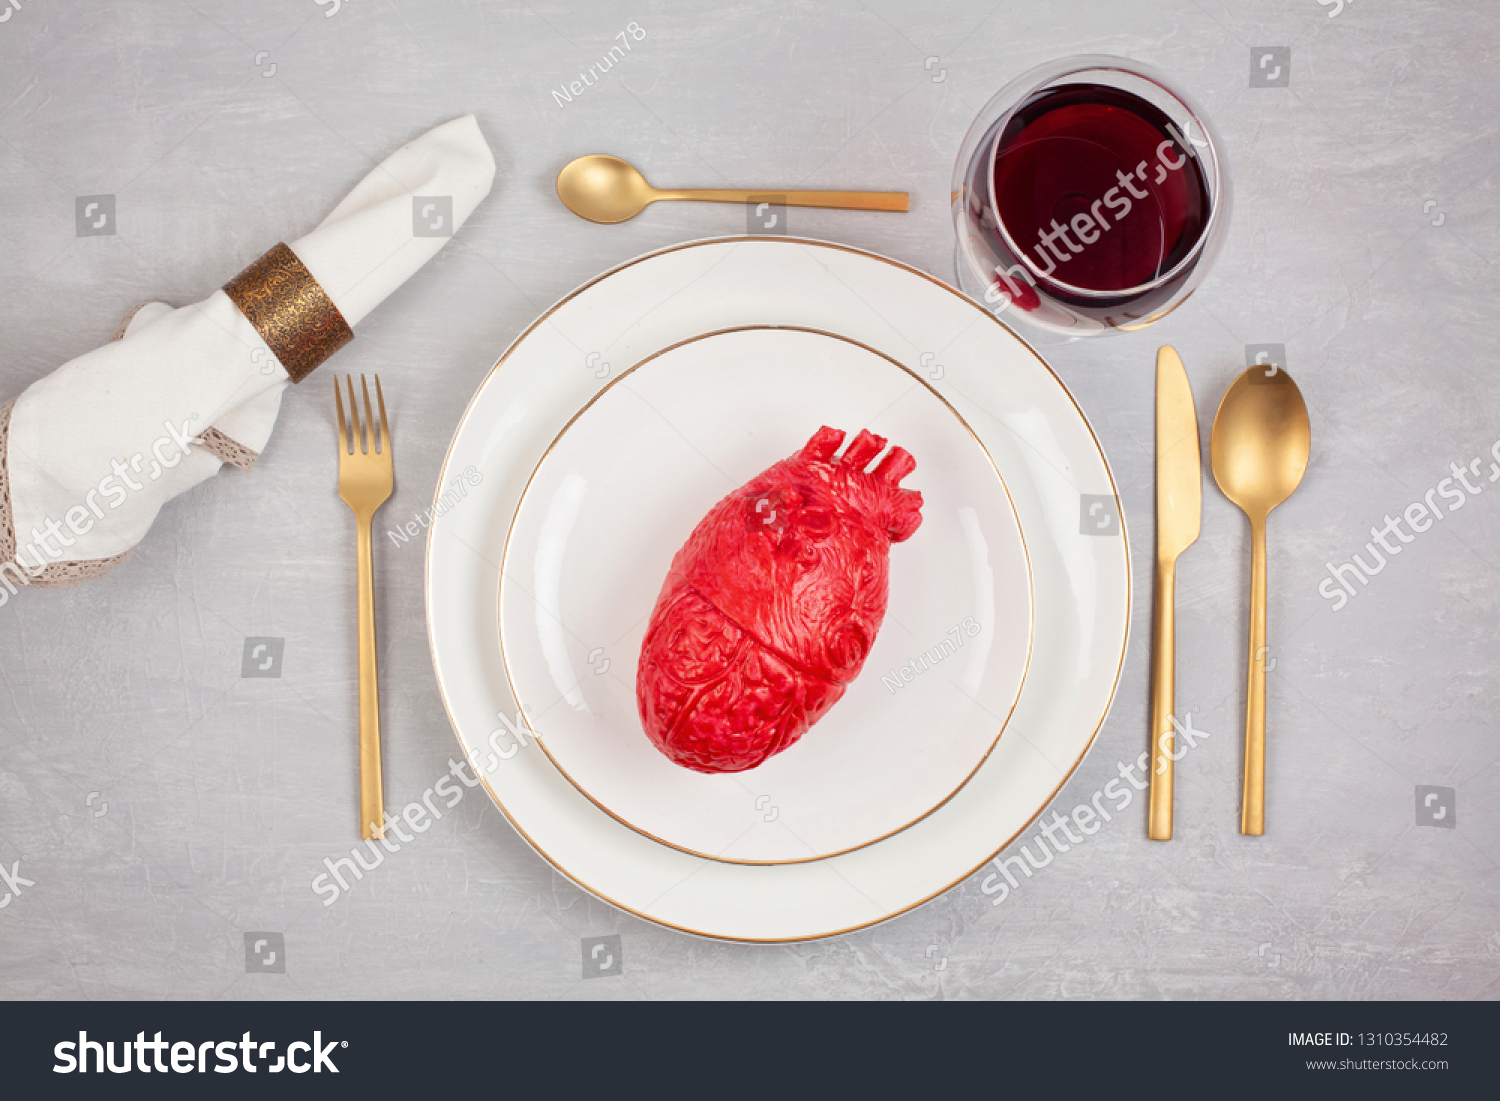 Realistic heart on the dining table in the plate. Love, marriage, proposal, heartbreaker humoristic concept #1310354482